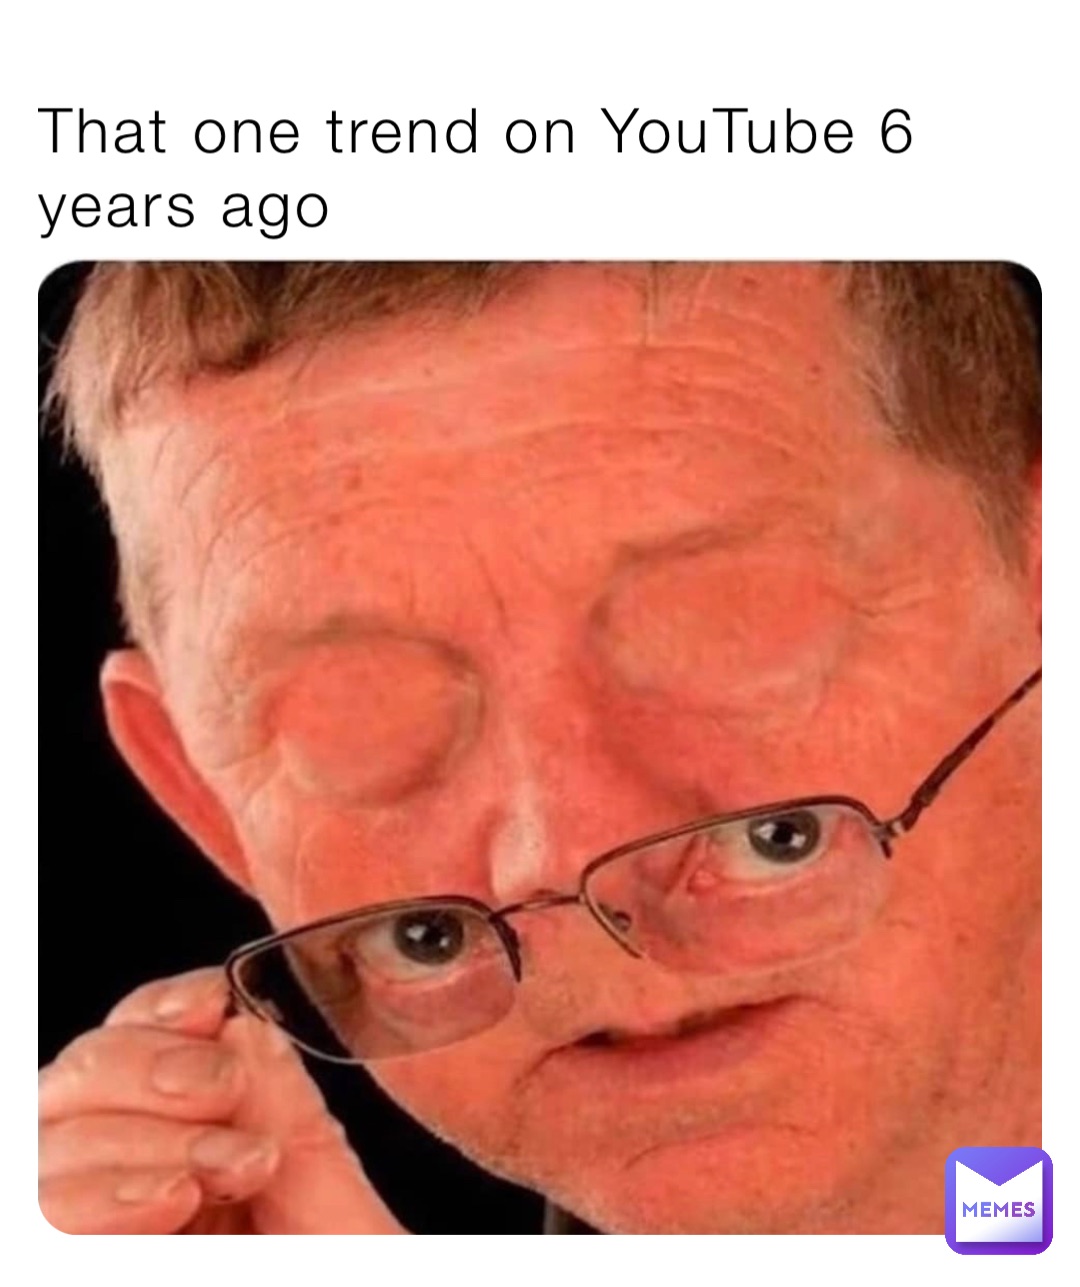 That one trend on YouTube 6 years ago